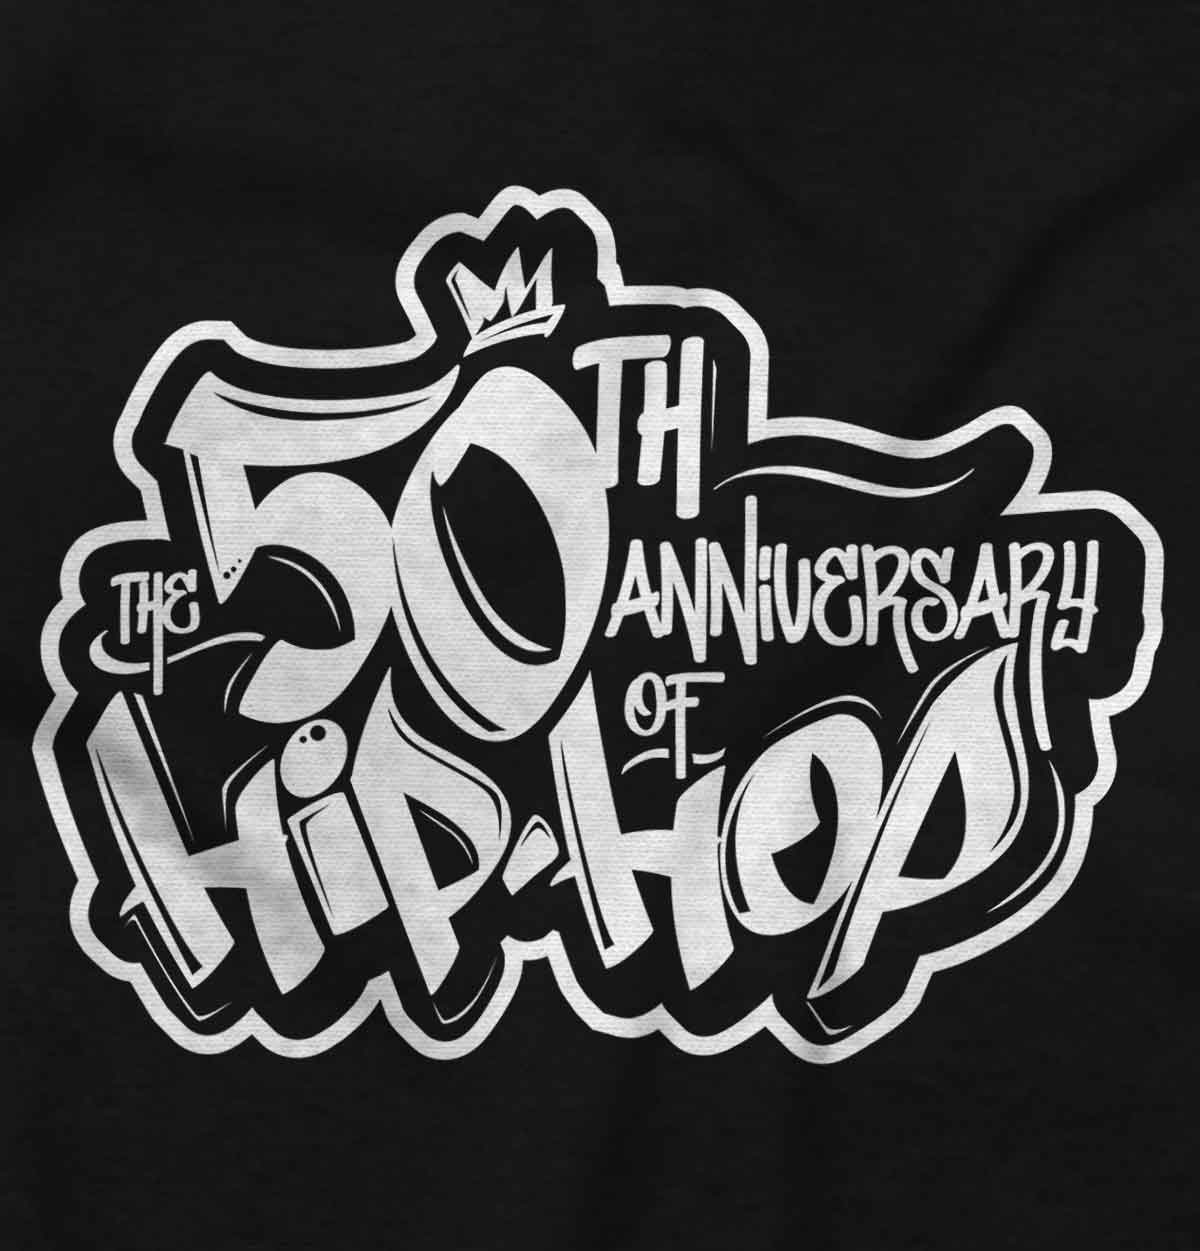 A powerful design that honors the influential "EPIC RHYME SYNDICATE" and its talented members. It showcases pictures of Donald D and his crew, reminding us of their impact on hip-hop culture.